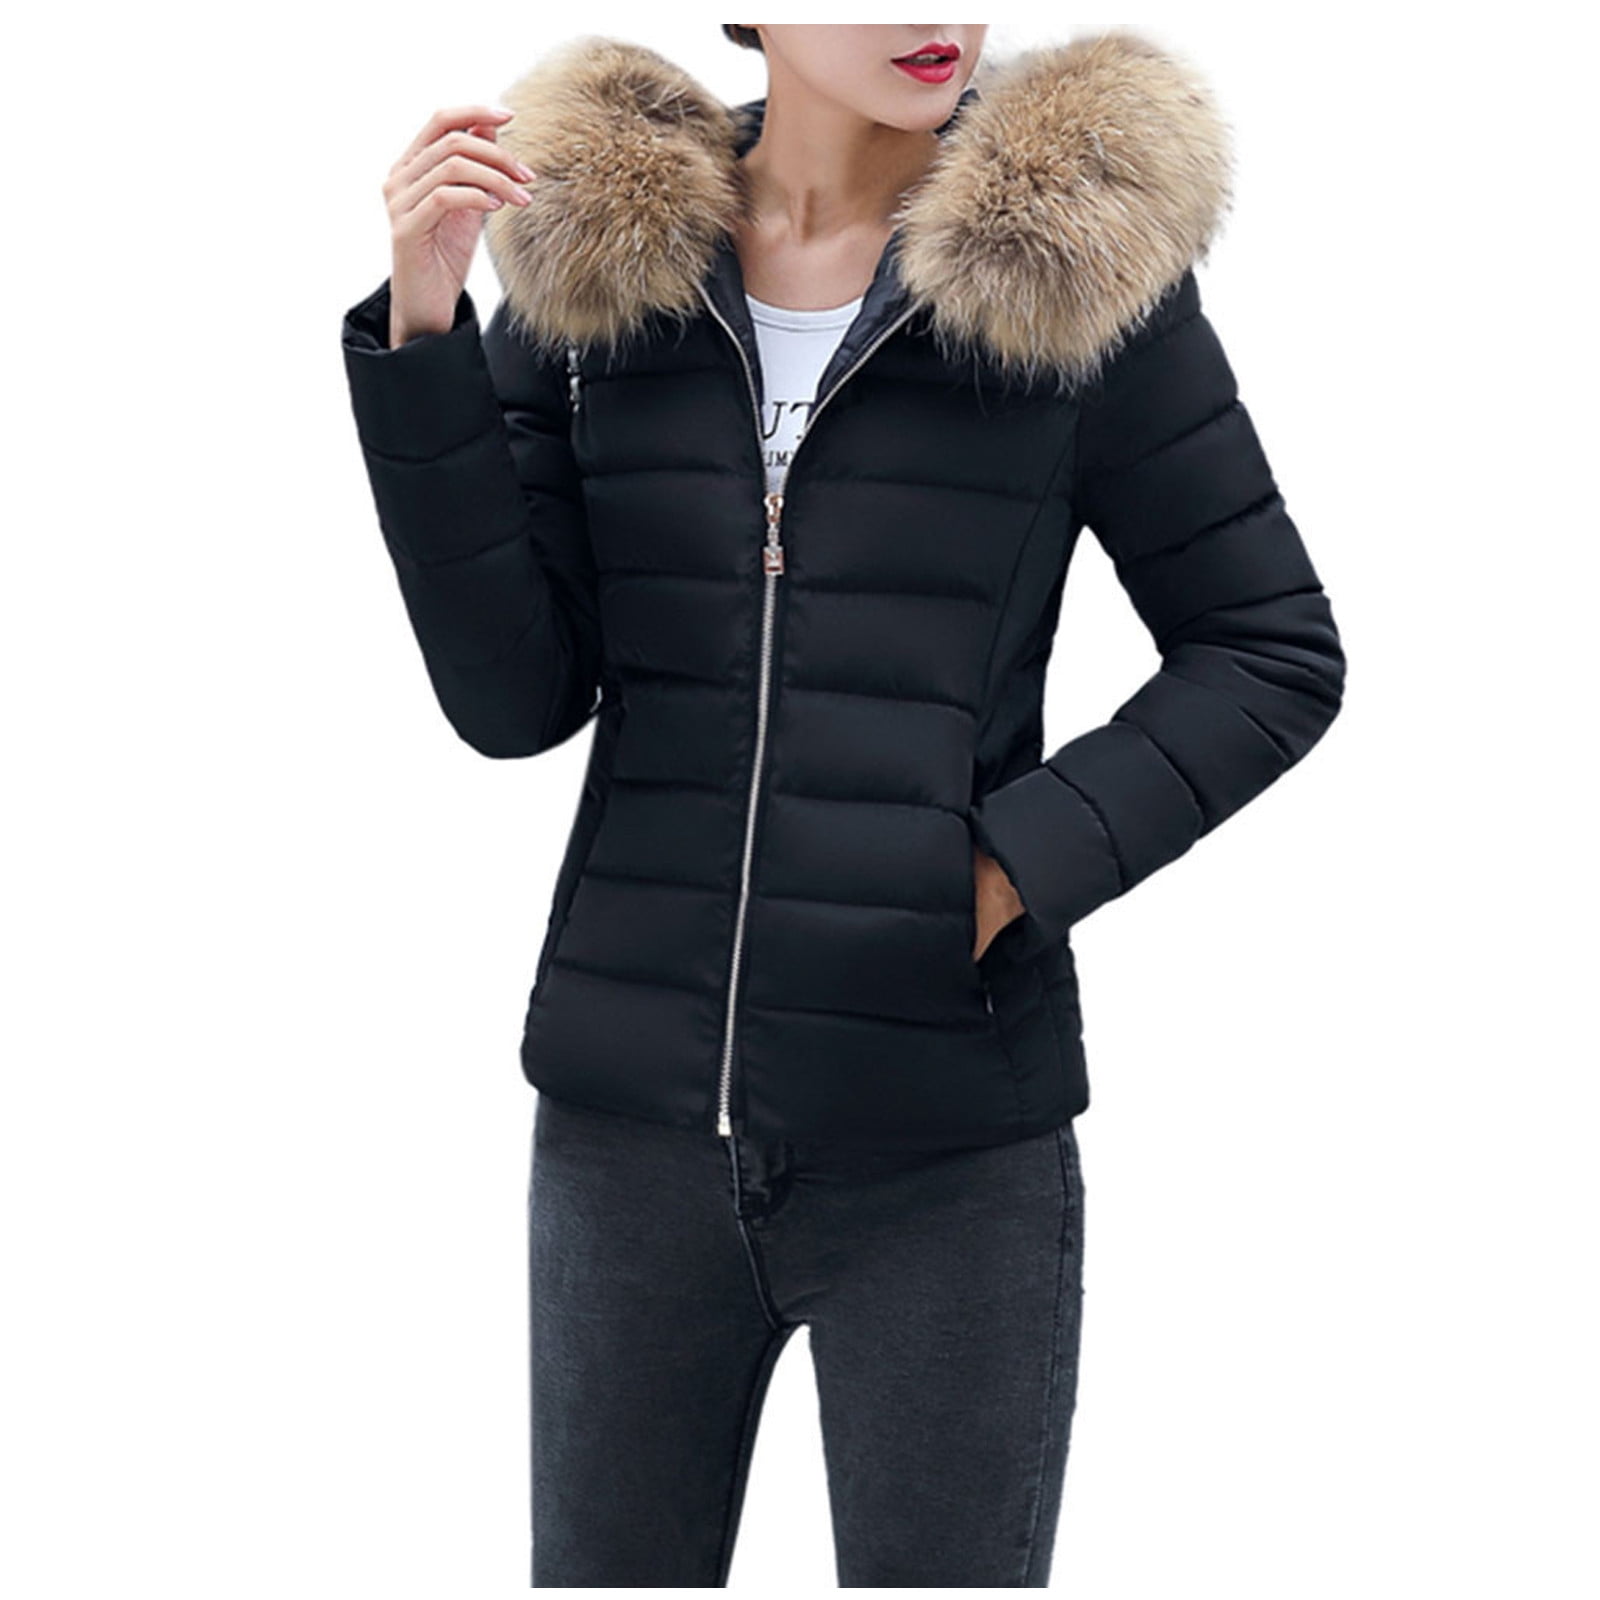 Winter Womens Denim Parka With Hooded Fur Collar And Padded Cotton Coat  With Fur Hood Abrigos Mujer Invierno KJ766 201028 From Bai03, $53.2